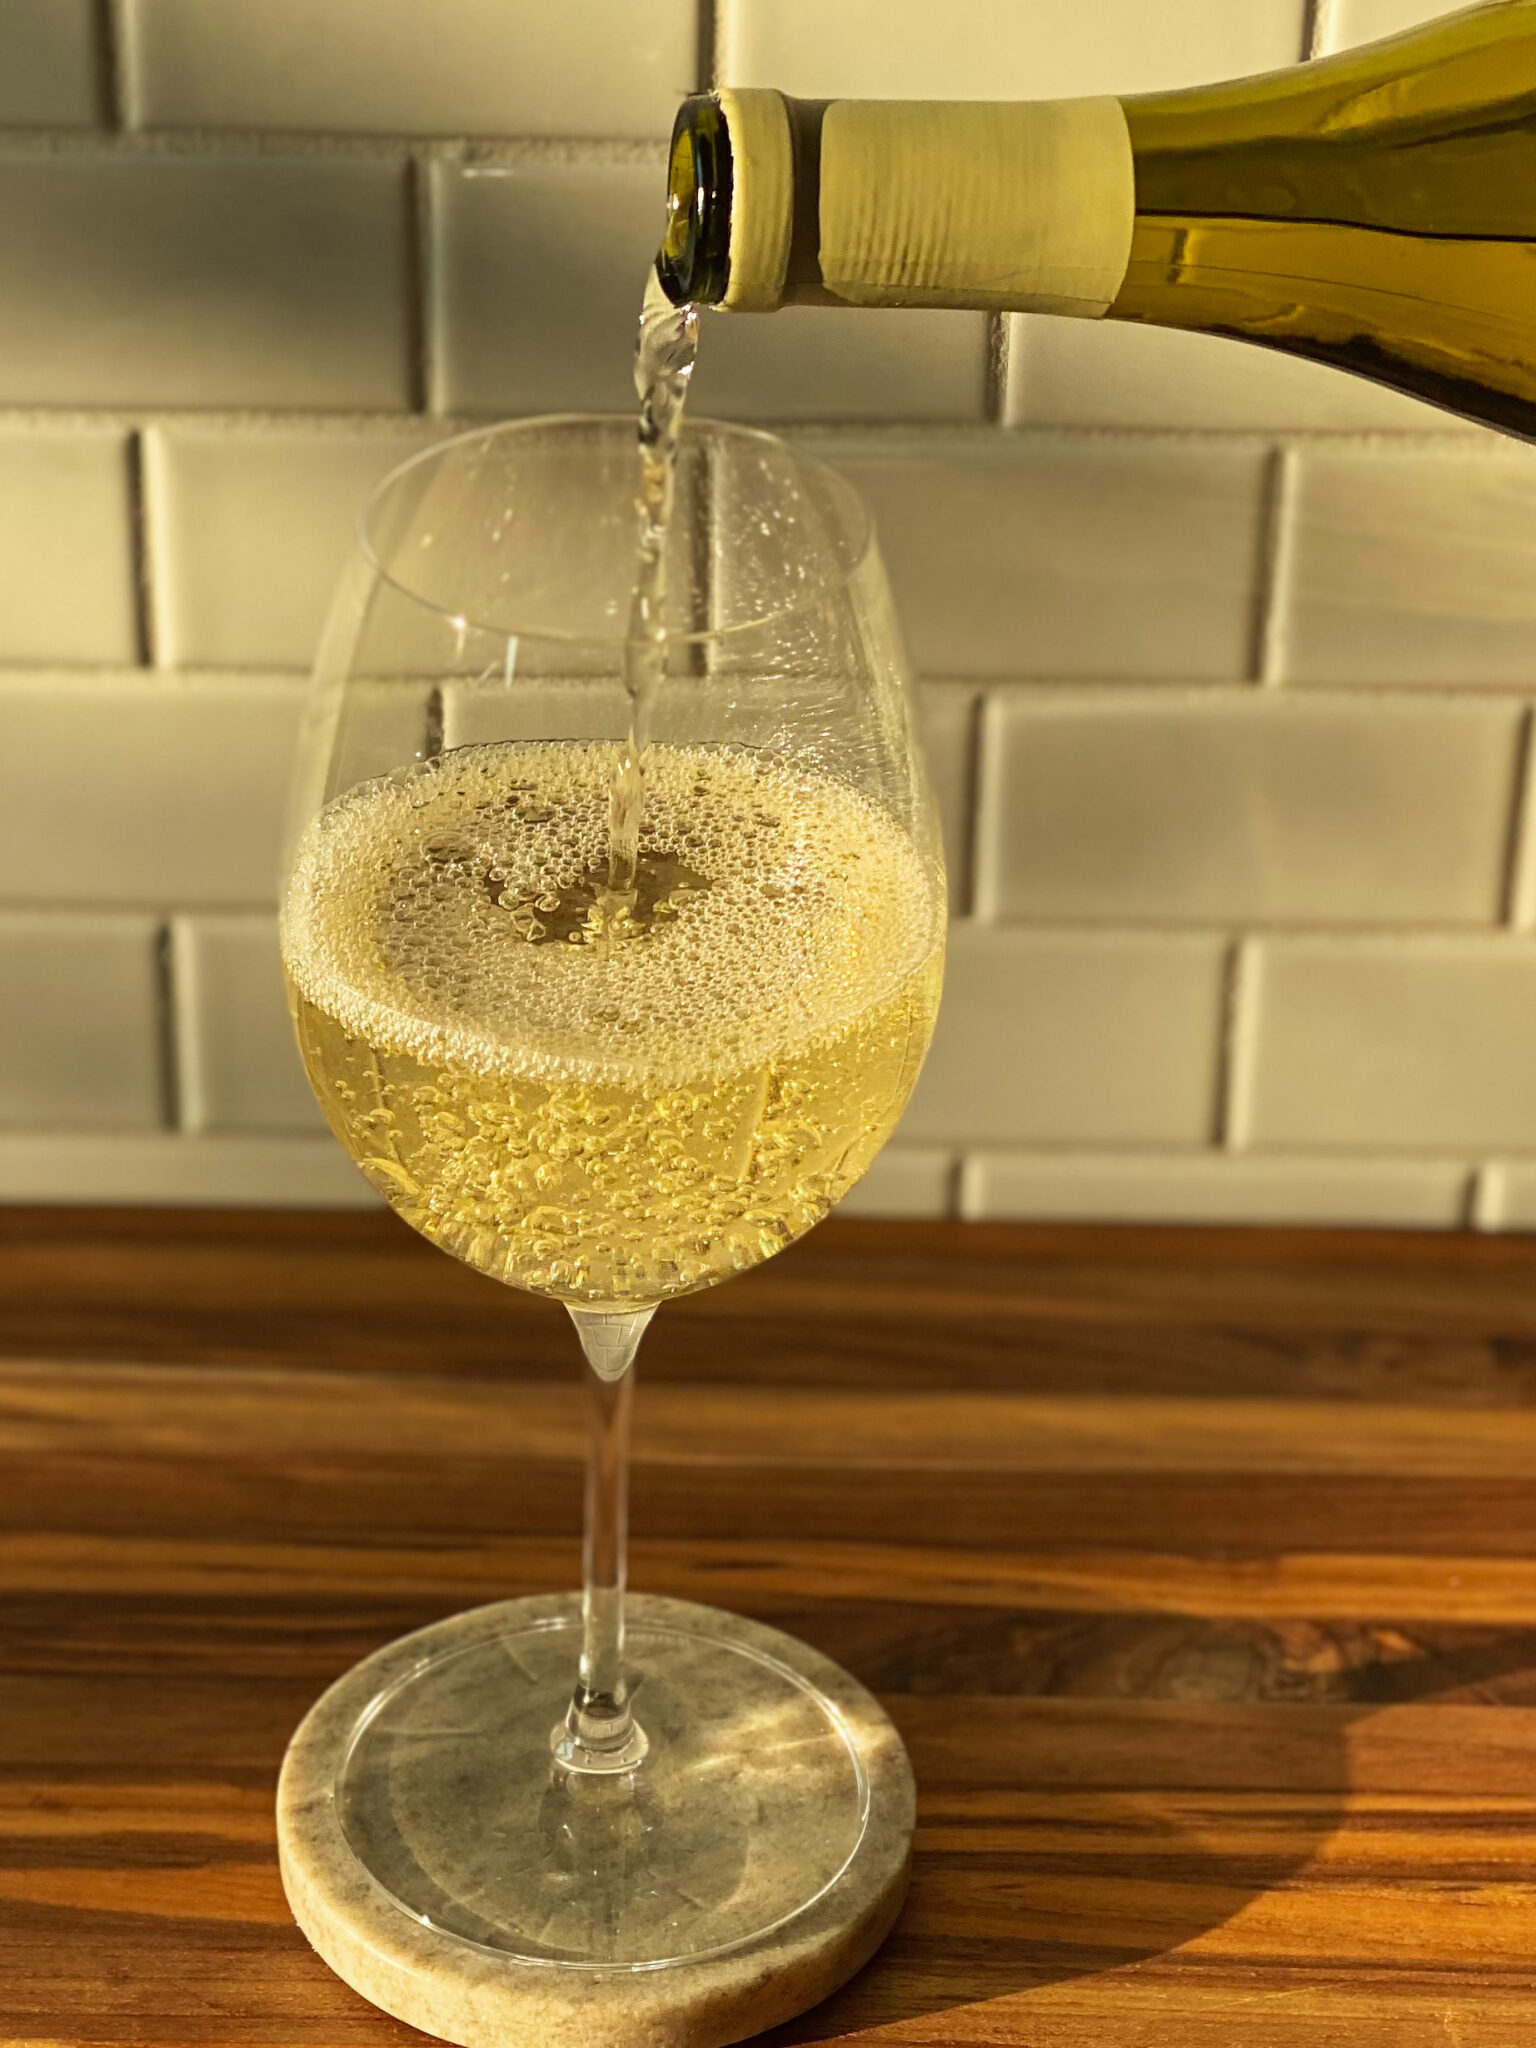 white wine being poured into a glass